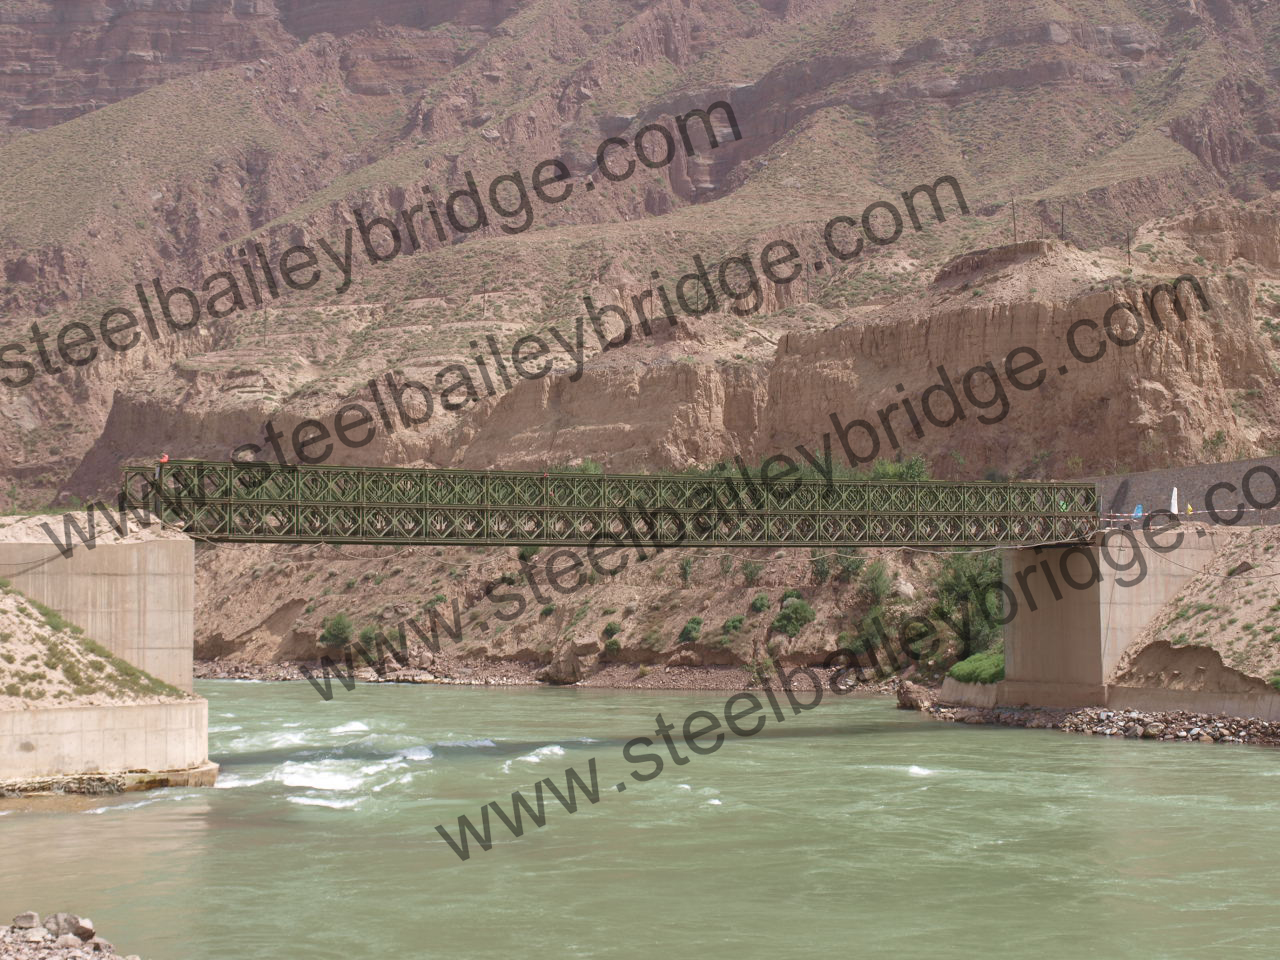 Luzhou period of Uppersteam of Yellow River